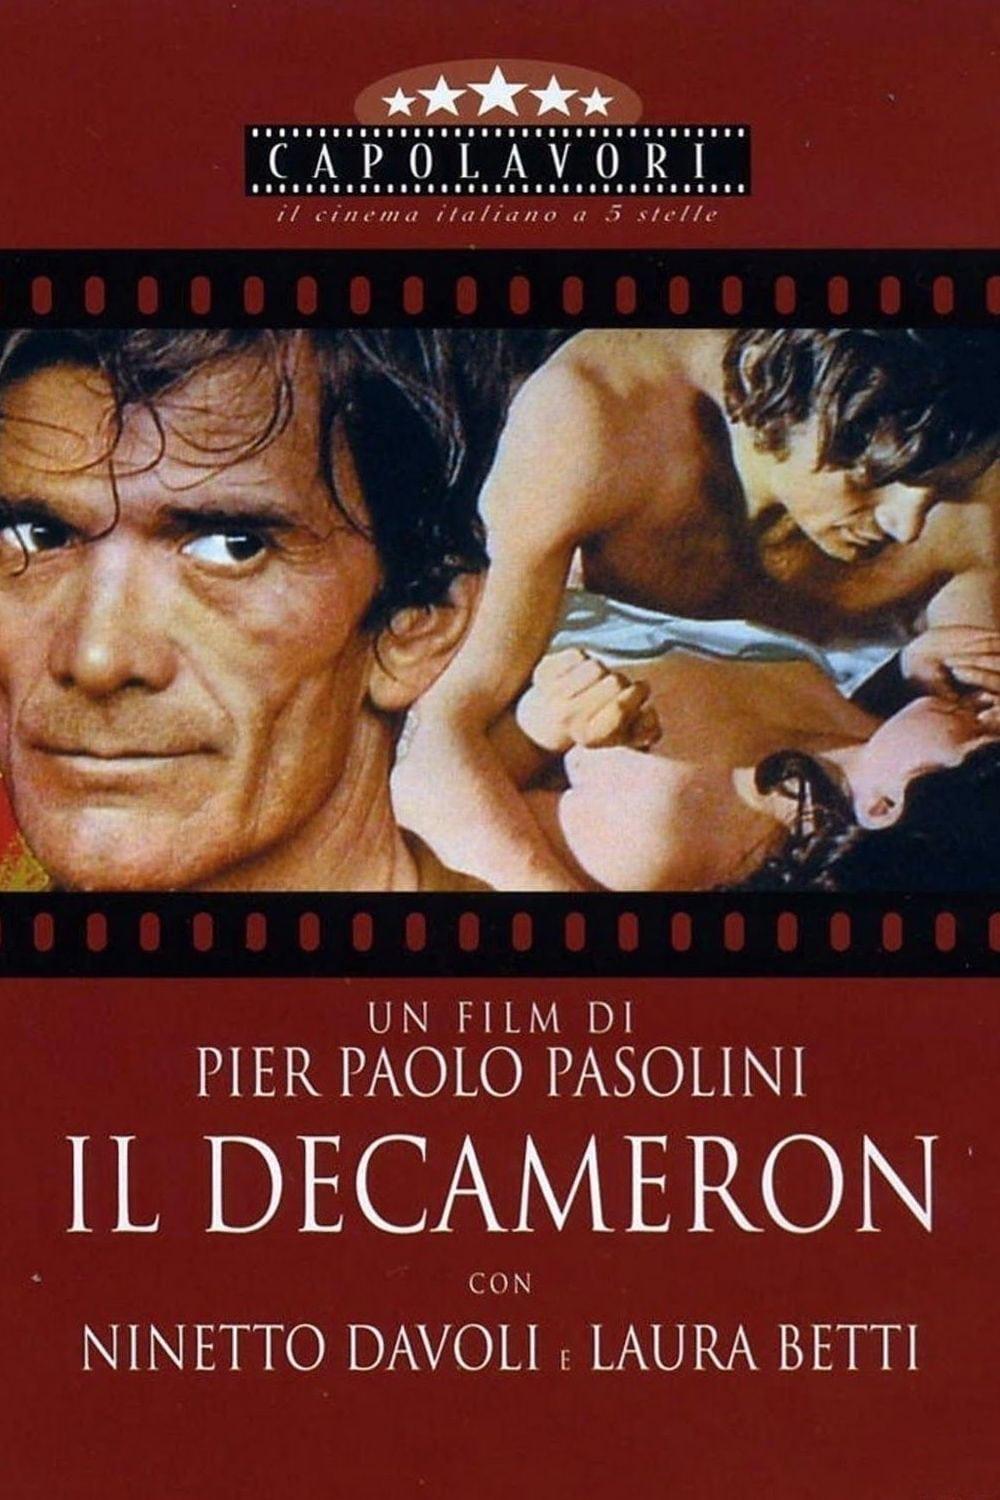 Decameron poster